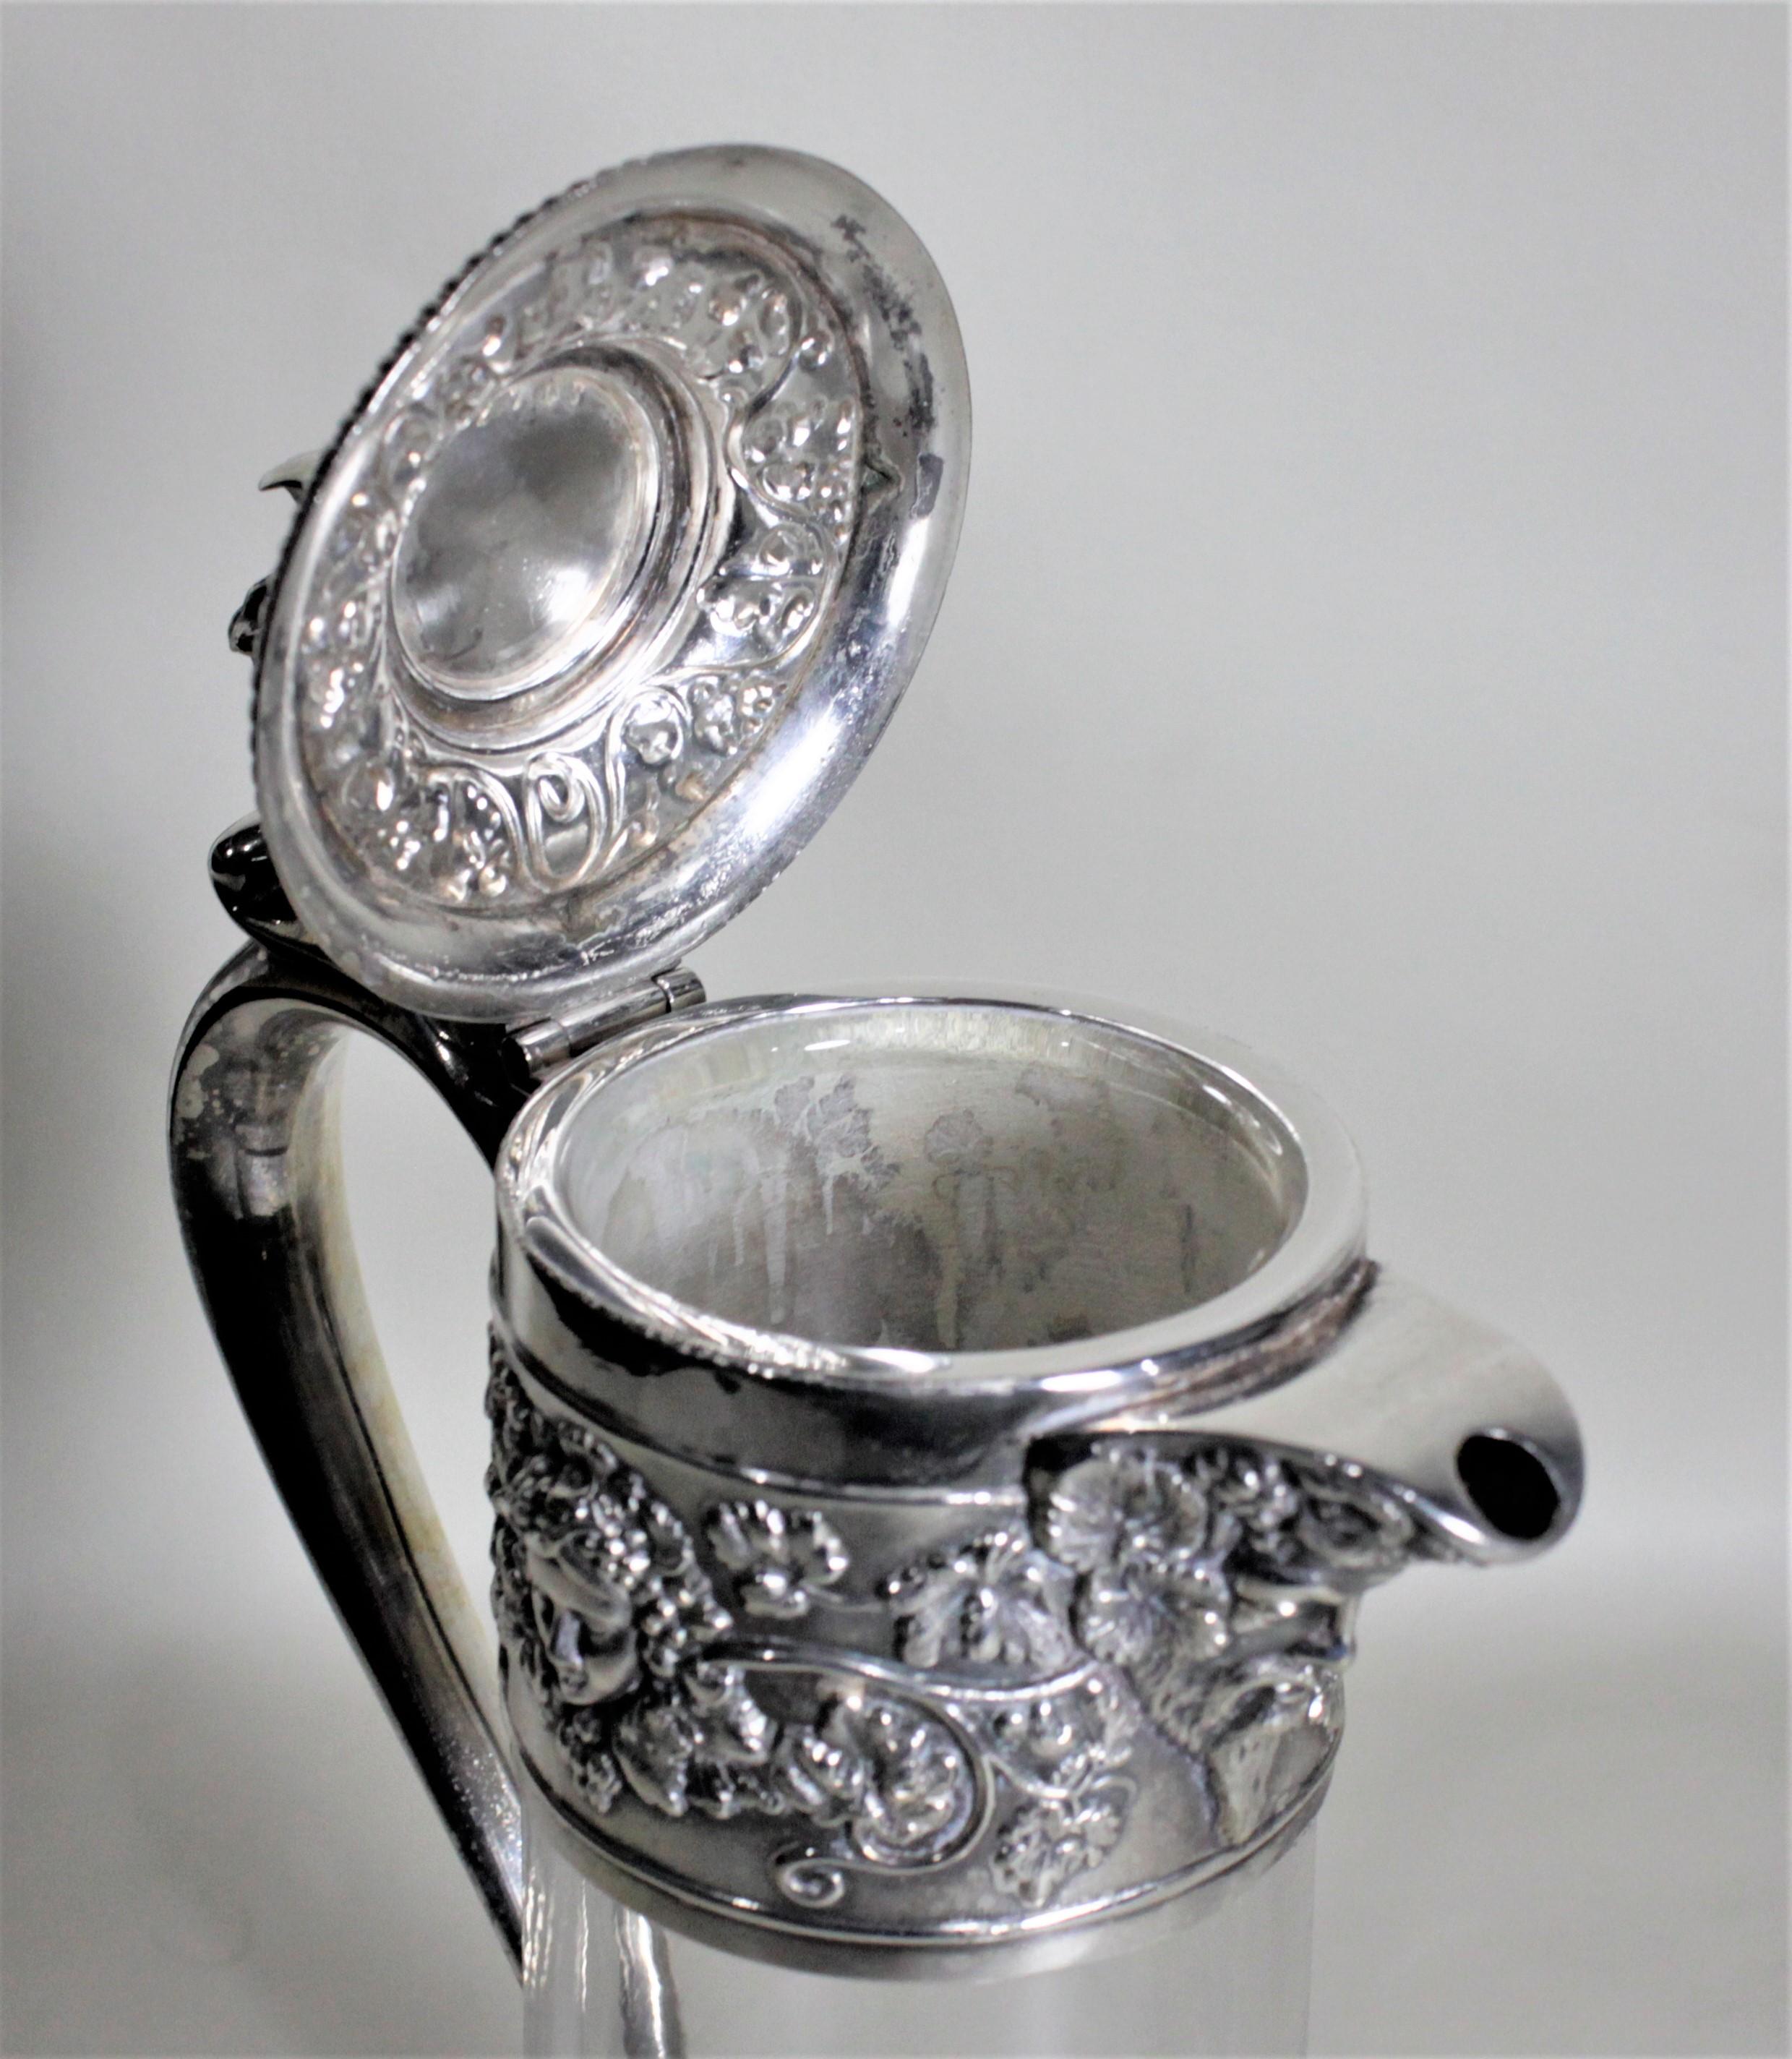 Antique English Silver Plated and Cut Glass Claret Jug or Decanter In Good Condition For Sale In Hamilton, Ontario